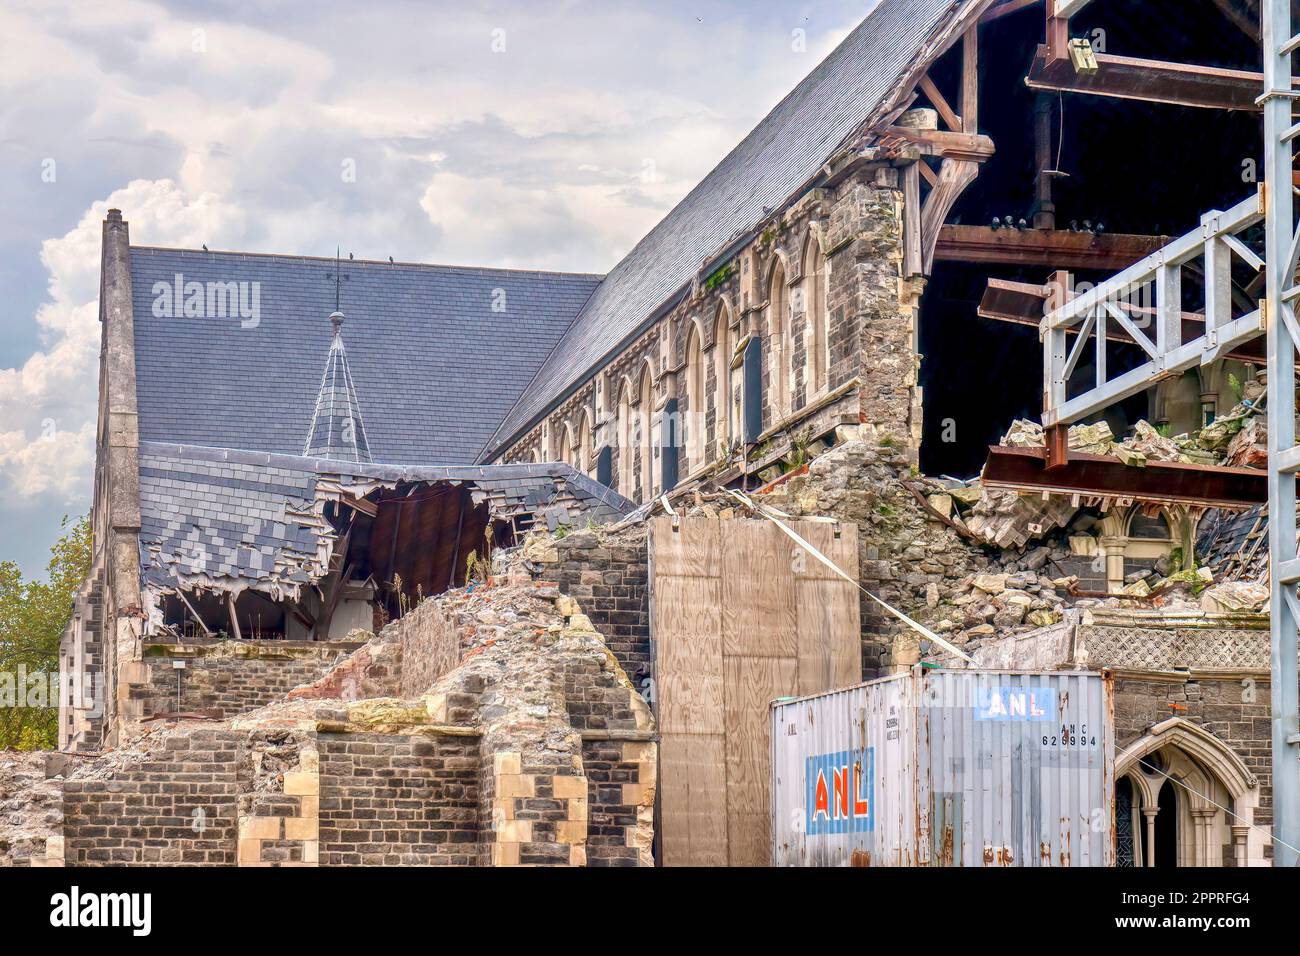 Christchurch, New Zealand - April 5, 2014. Close-up view of the damaged Christ Church Cathedral spire and tower three years post-earthquake. Stock Photo